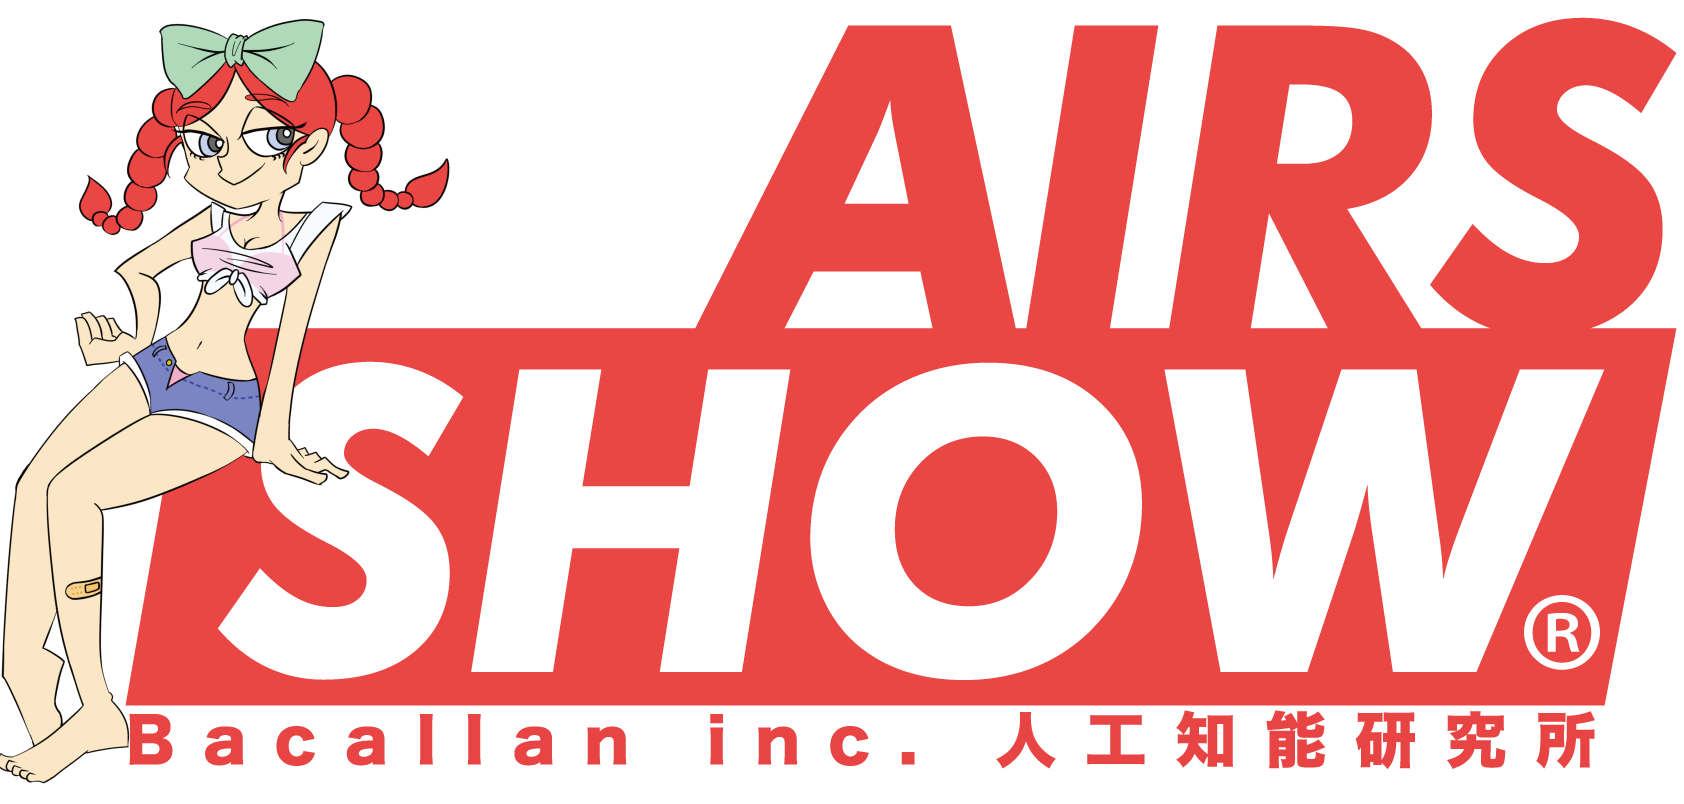 AirsShow展示会タイプ